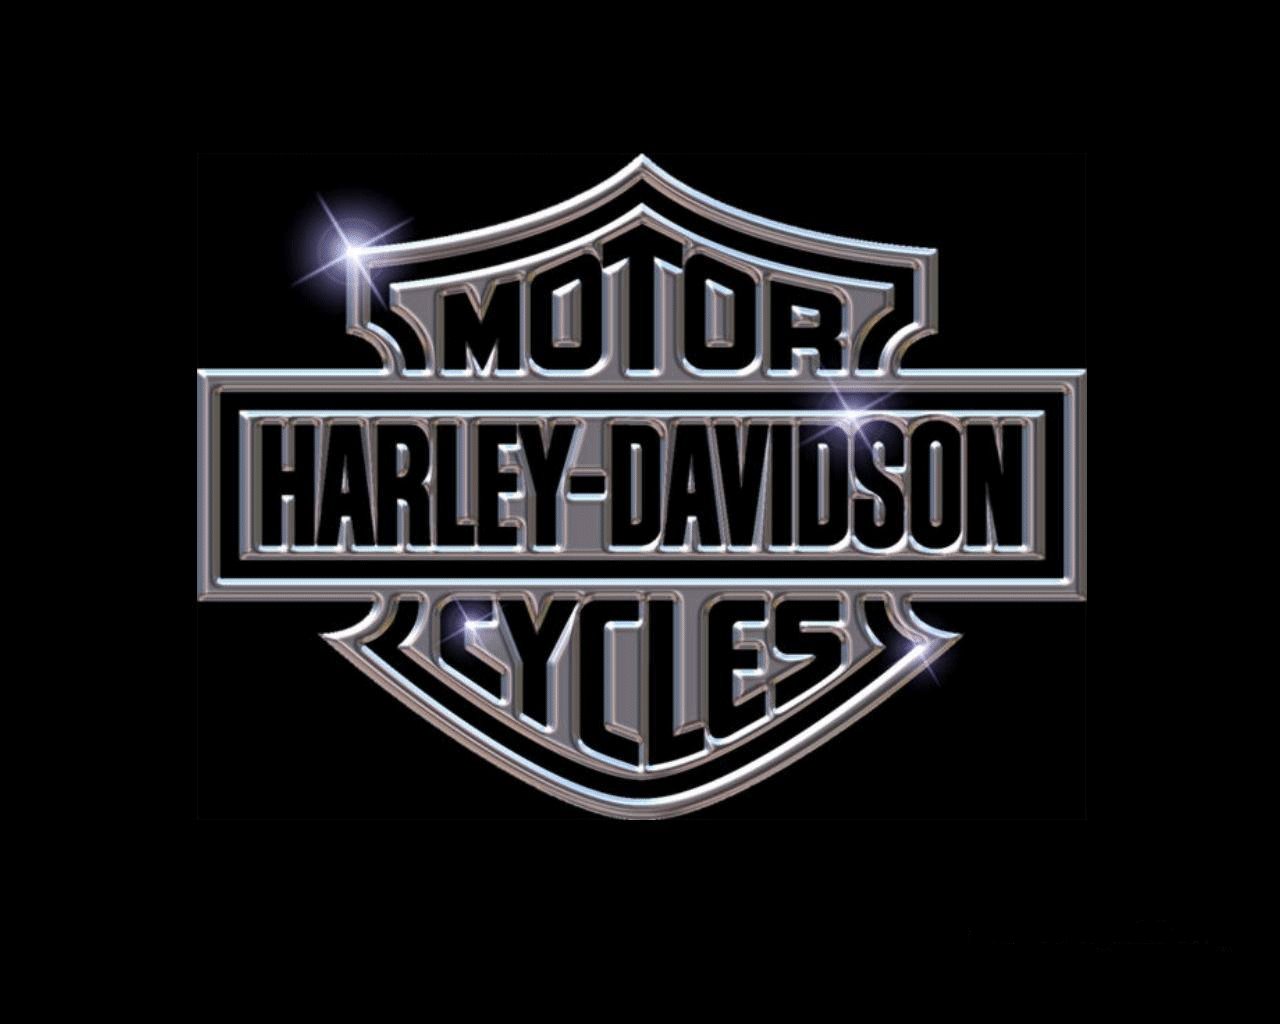 1000 Harley Davidson Wallpaper: Harley Davidson Wallpaper Collection #1